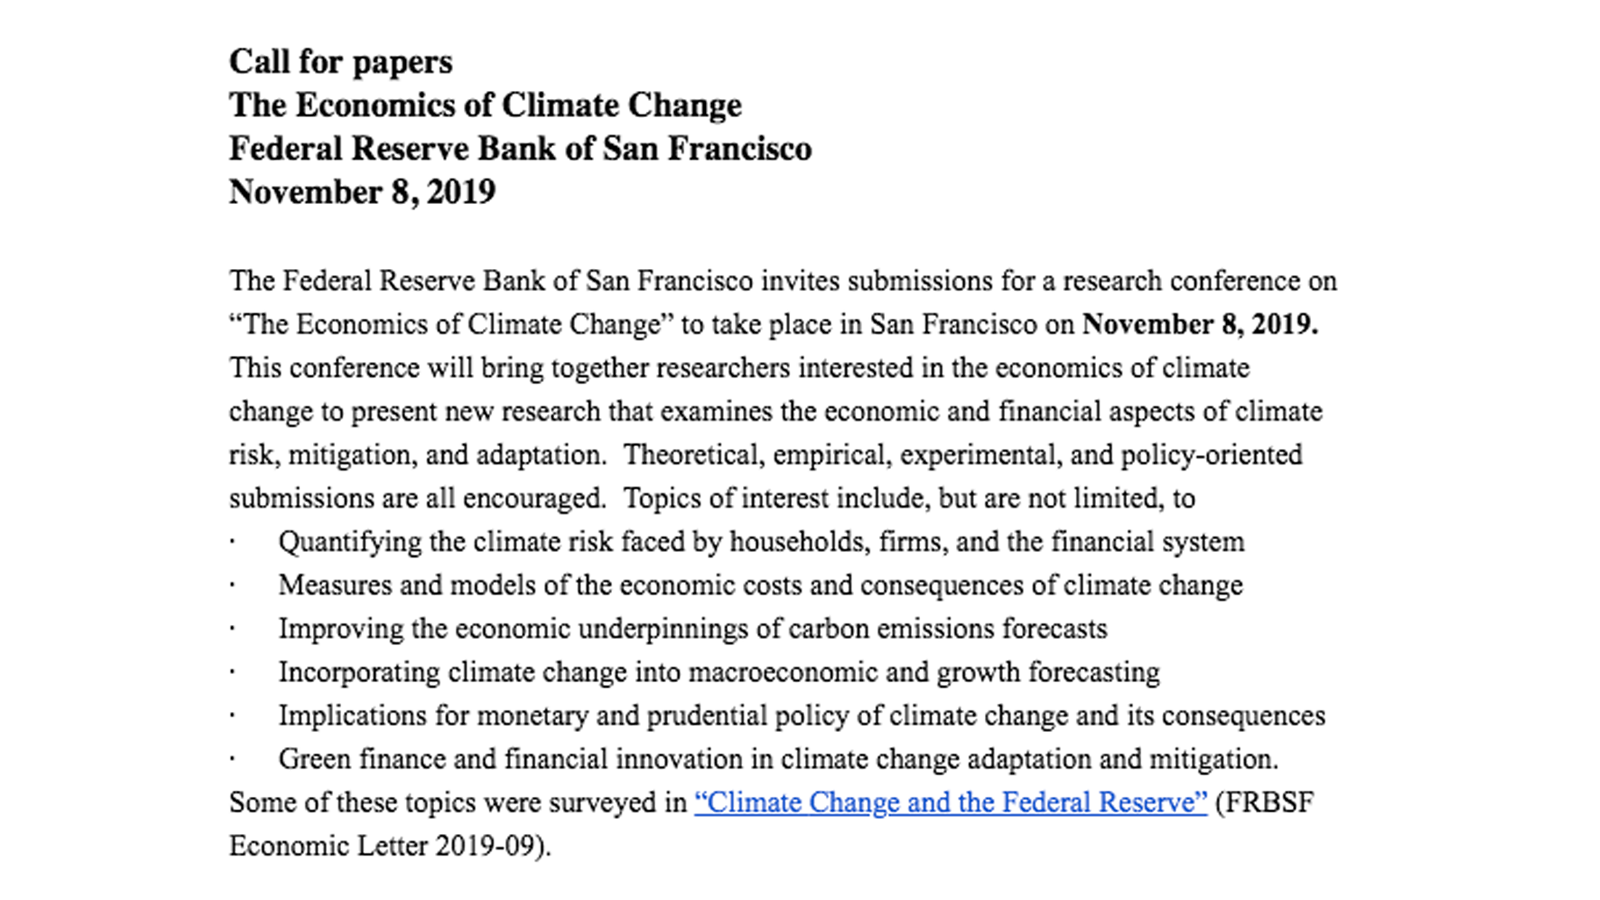 Fed's call for research on subjects related to climate change